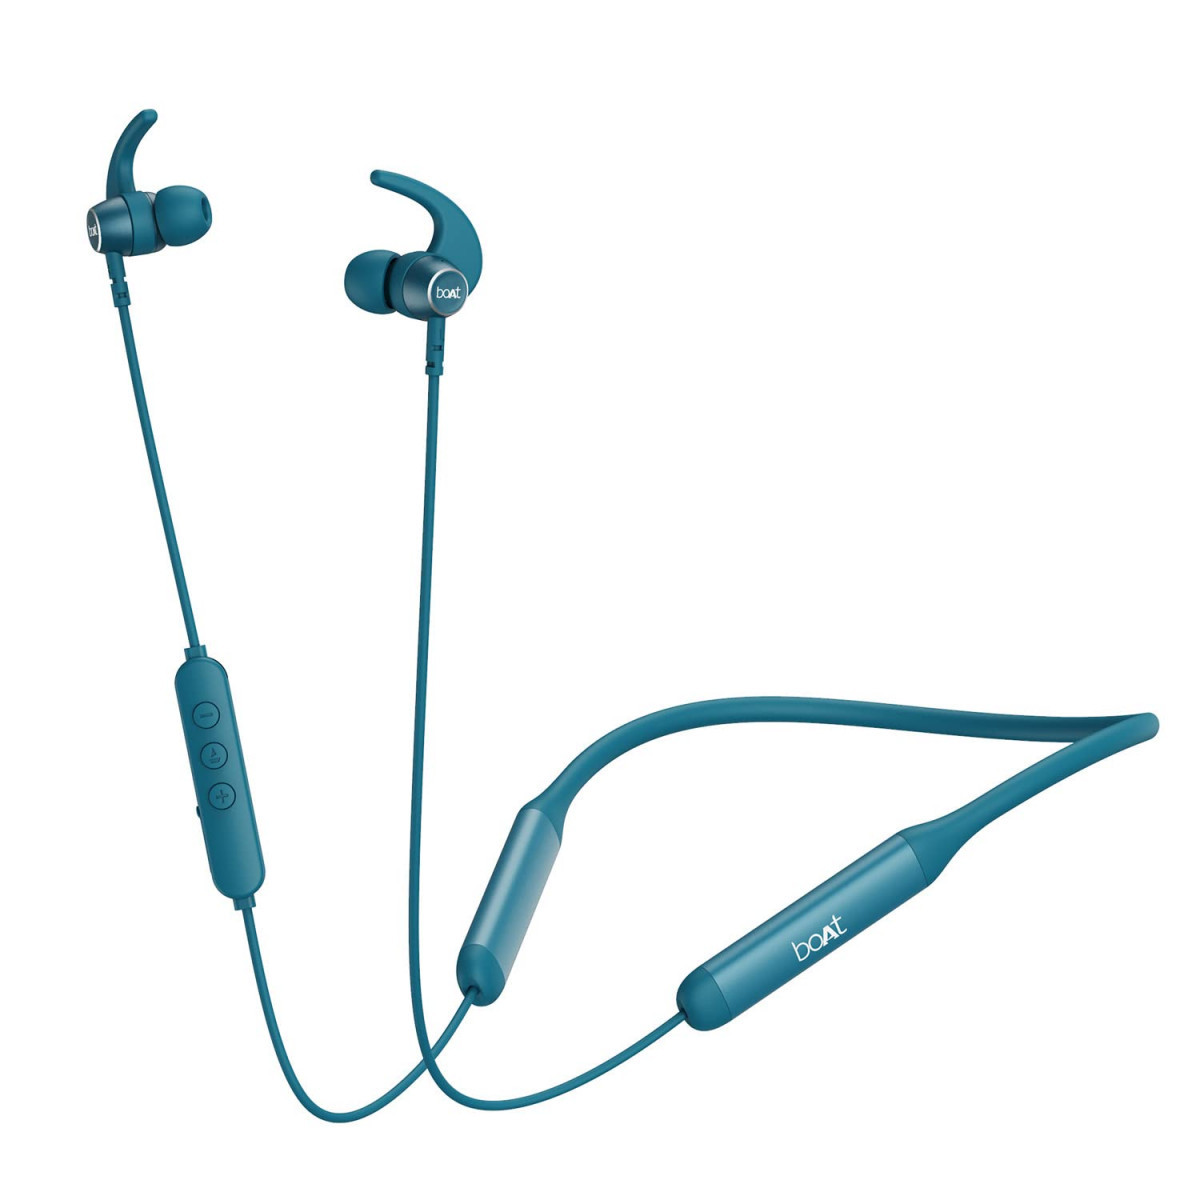 boAt Rockerz 330 Pro in-Ear Bluetooth Neckband with 60HRS Playtime ASAP Charge ENx Tech Signature Sound BT v52 Dual Pairing IPX5 with Mic Teal Green